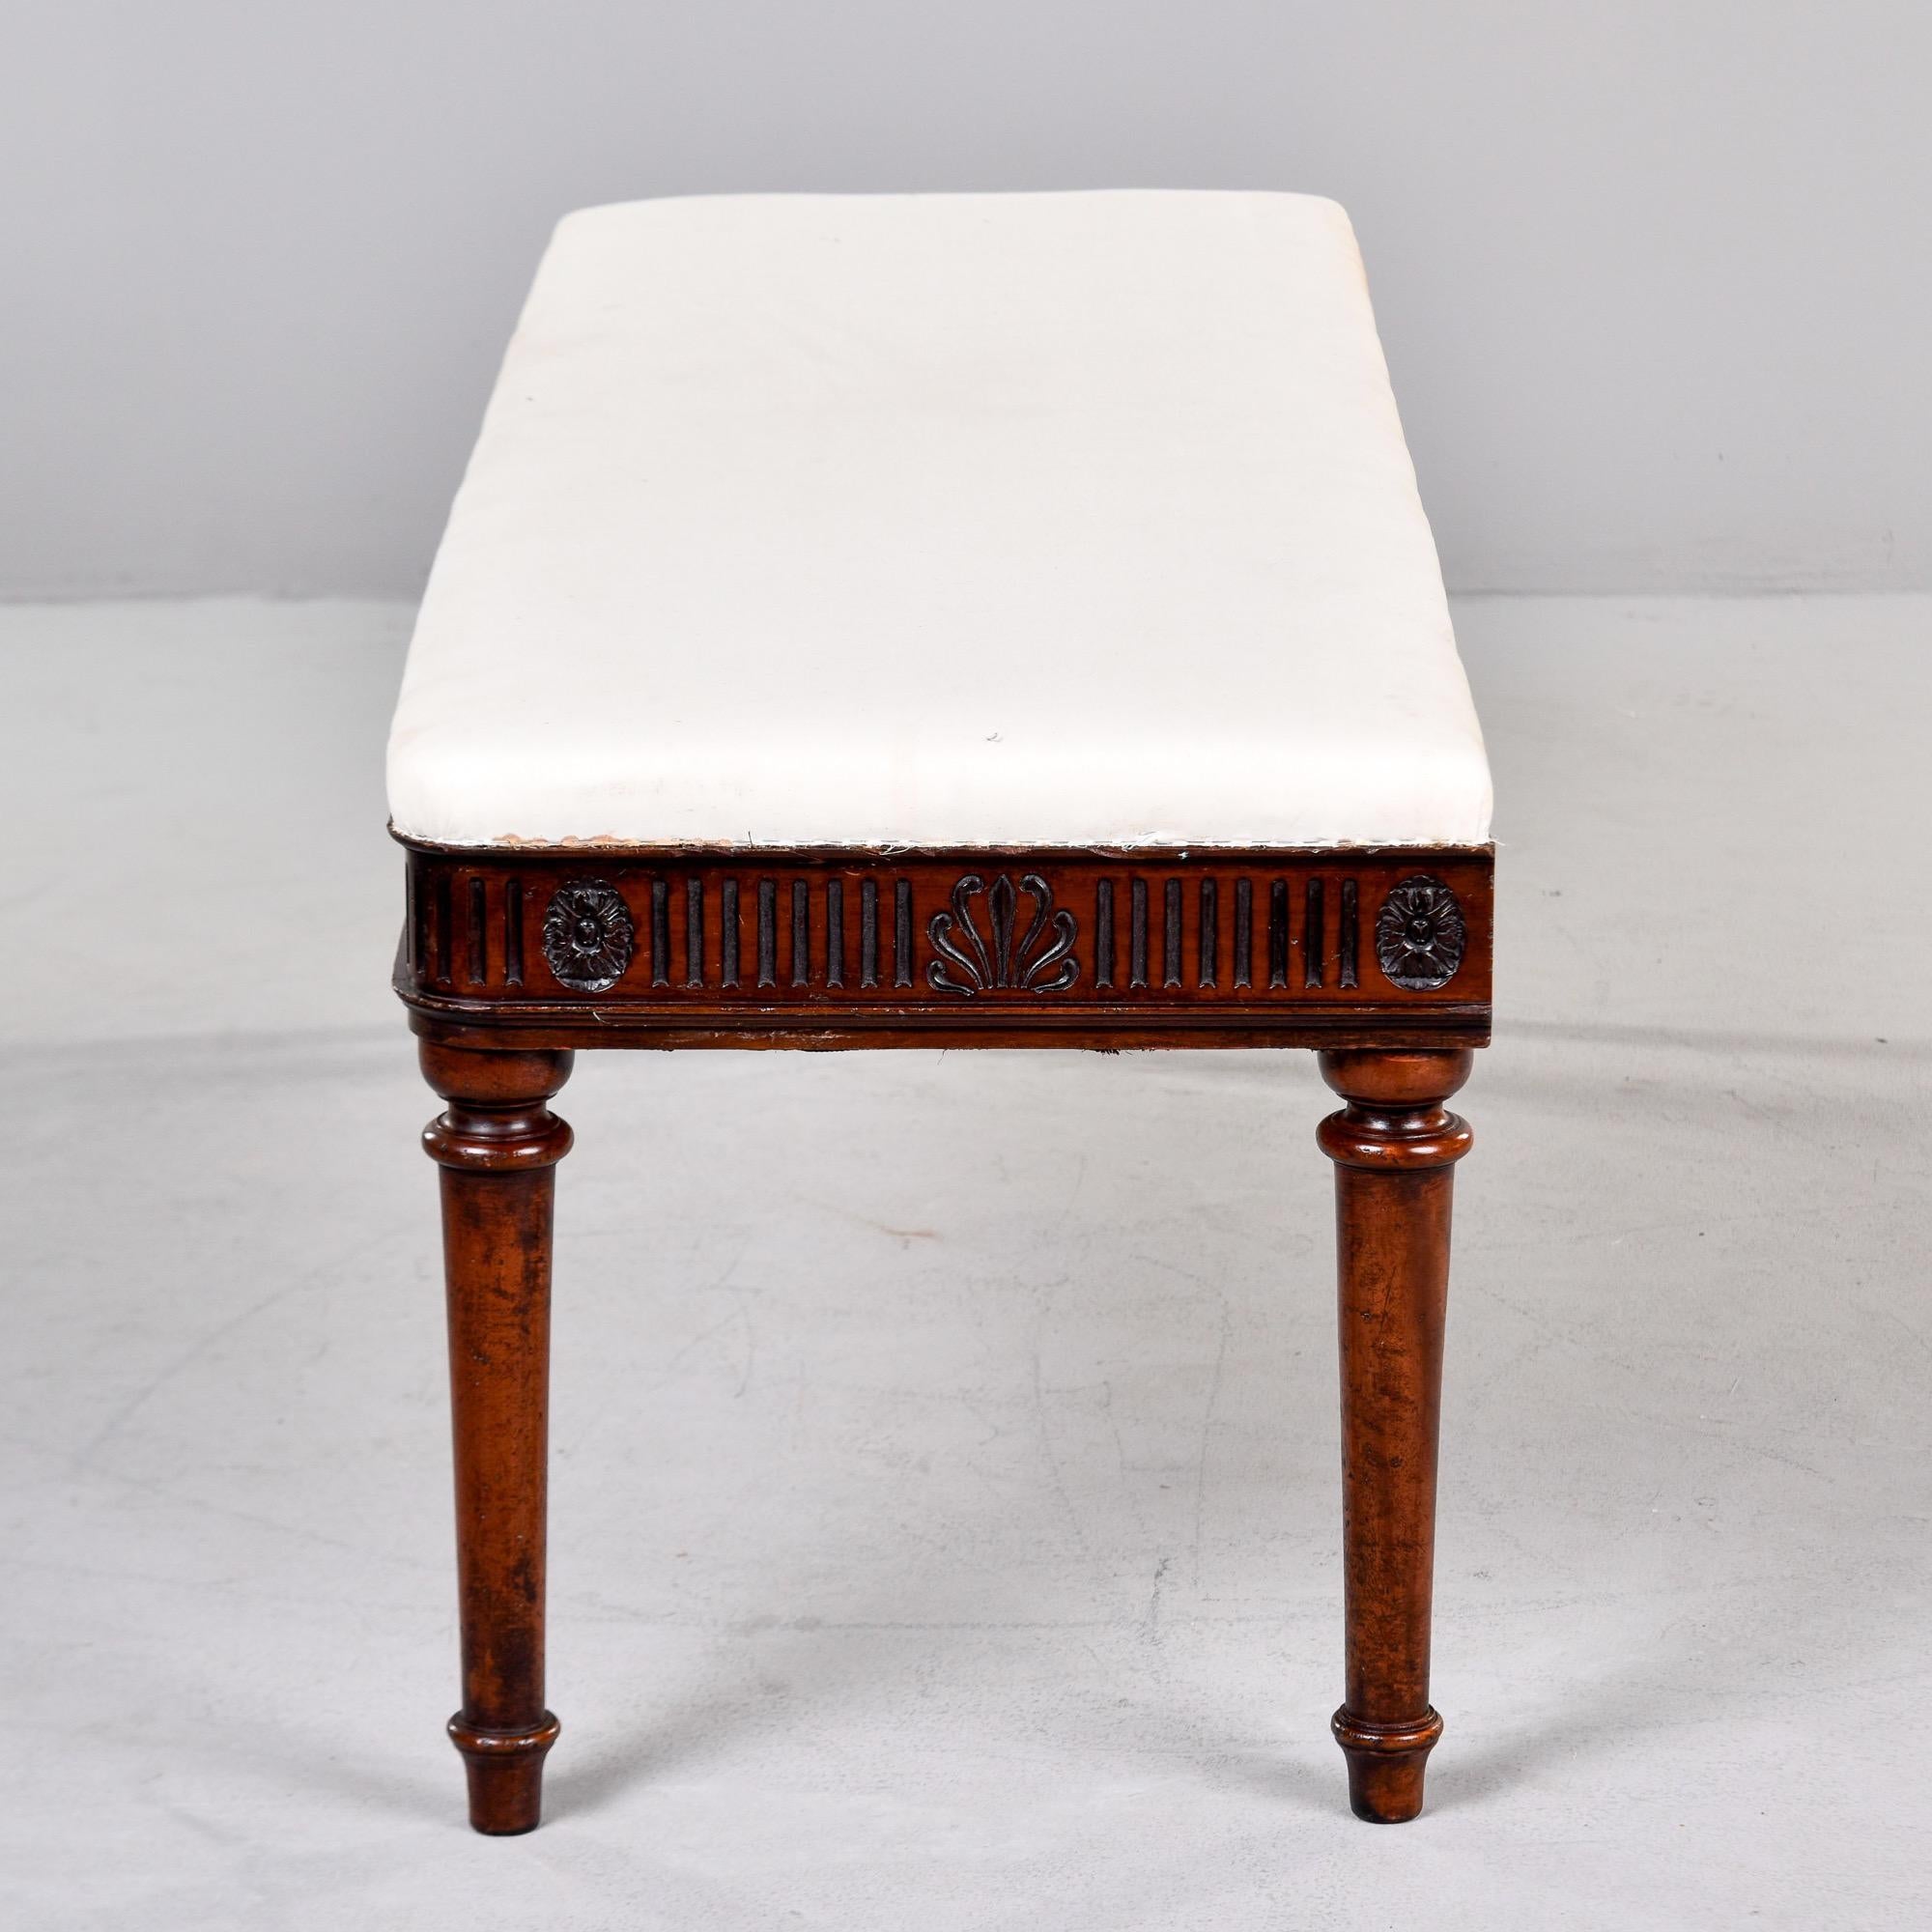 Mid 19th C English Upholstered Mahogany Window Seat with Reeded Detail   For Sale 2